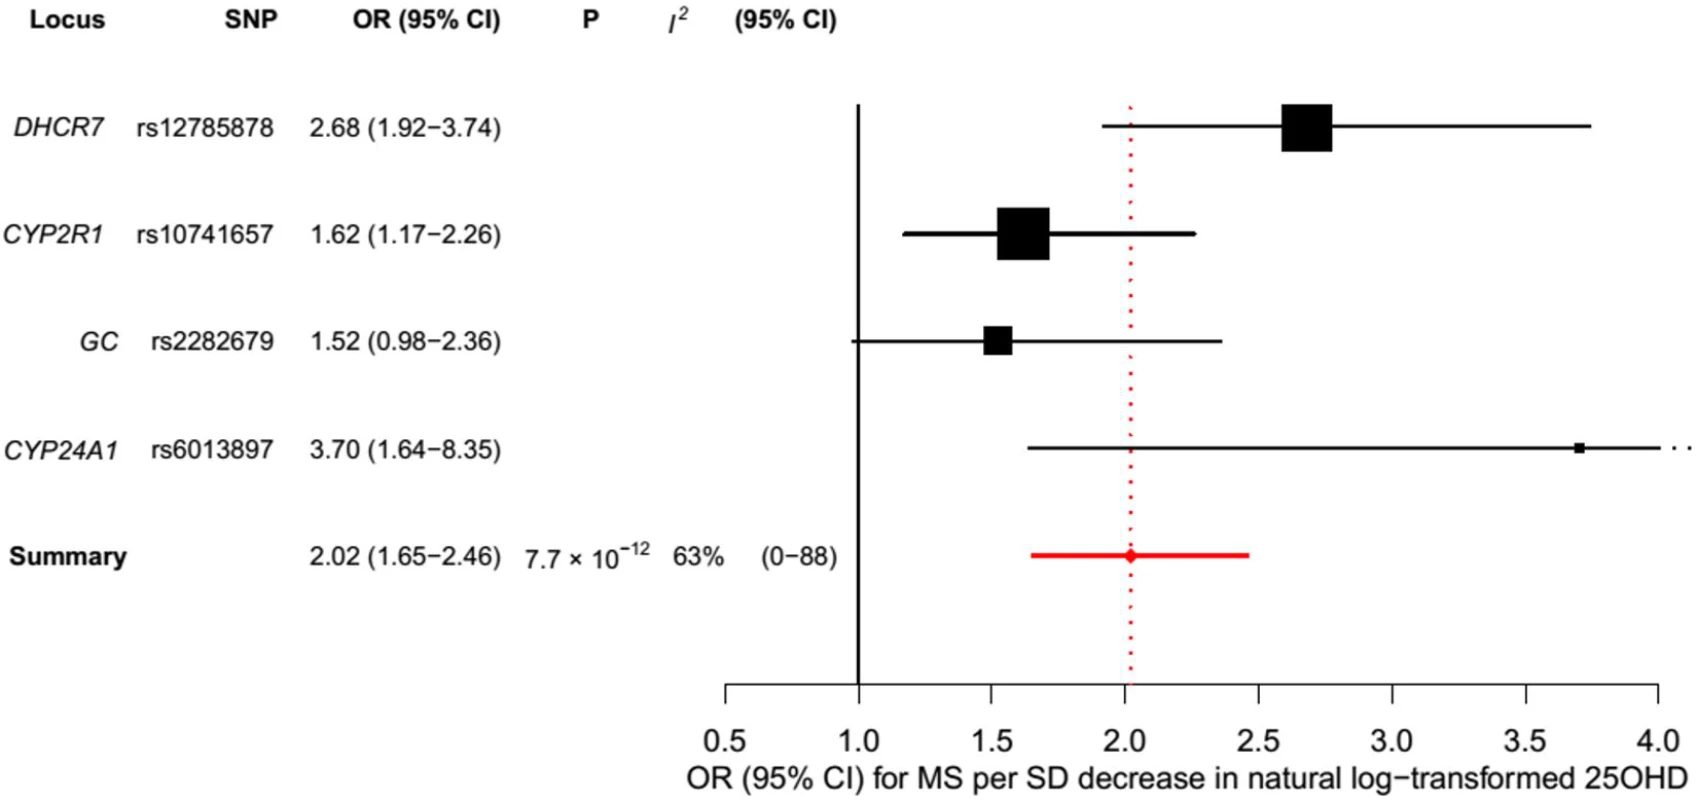 Mendelian randomization estimate of the association of 25OHD level with risk of multiple sclerosis.